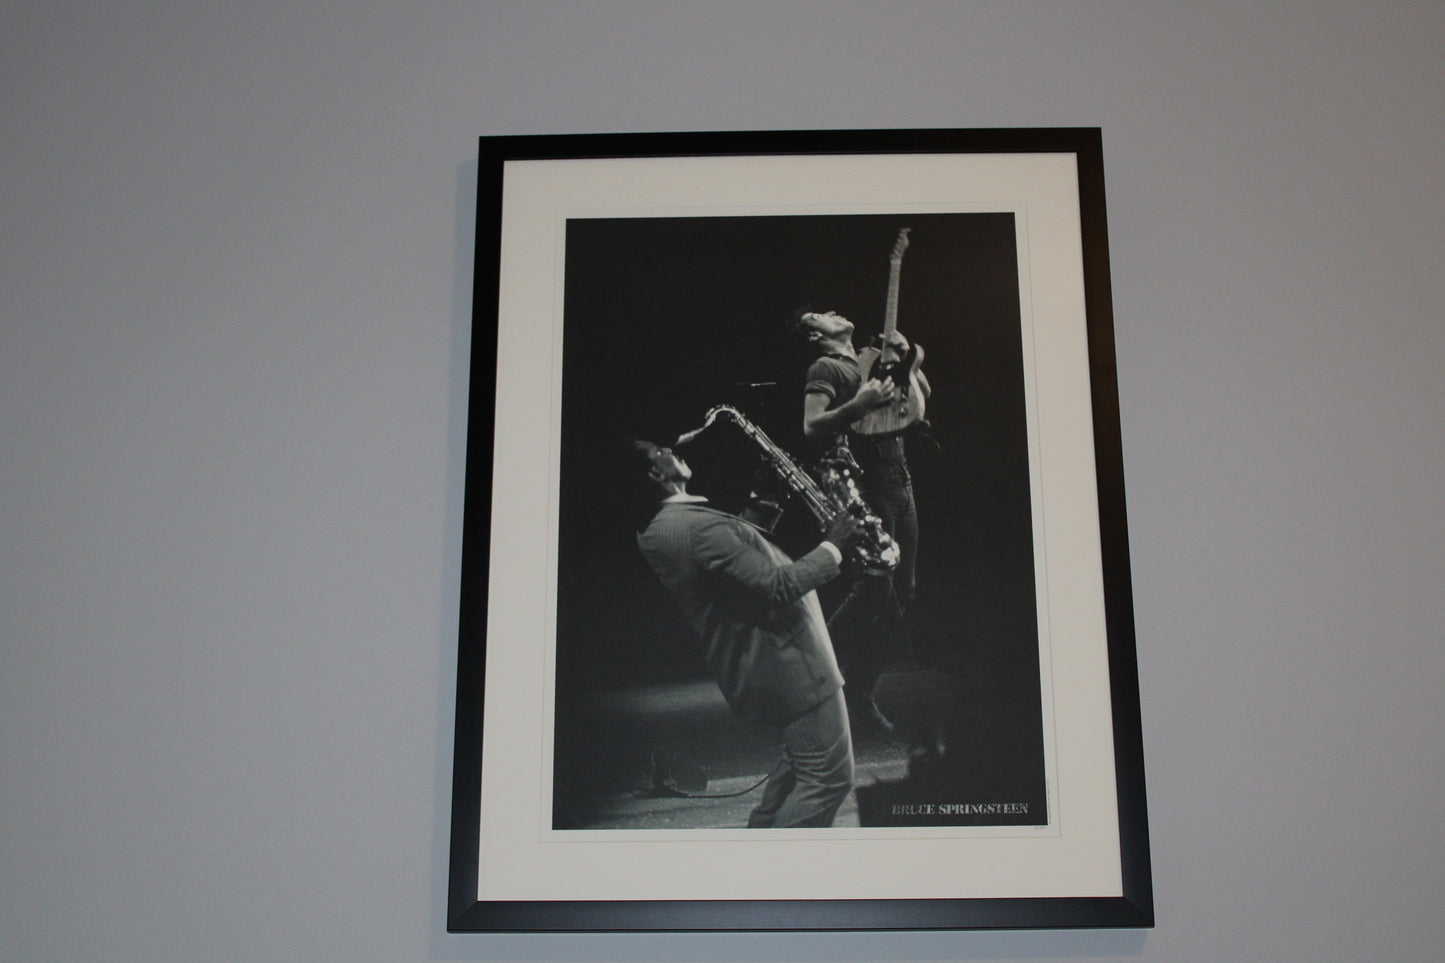 Bruce Springsteen Lithograph - #19/500 Original Bruce and The Big Man Collectible